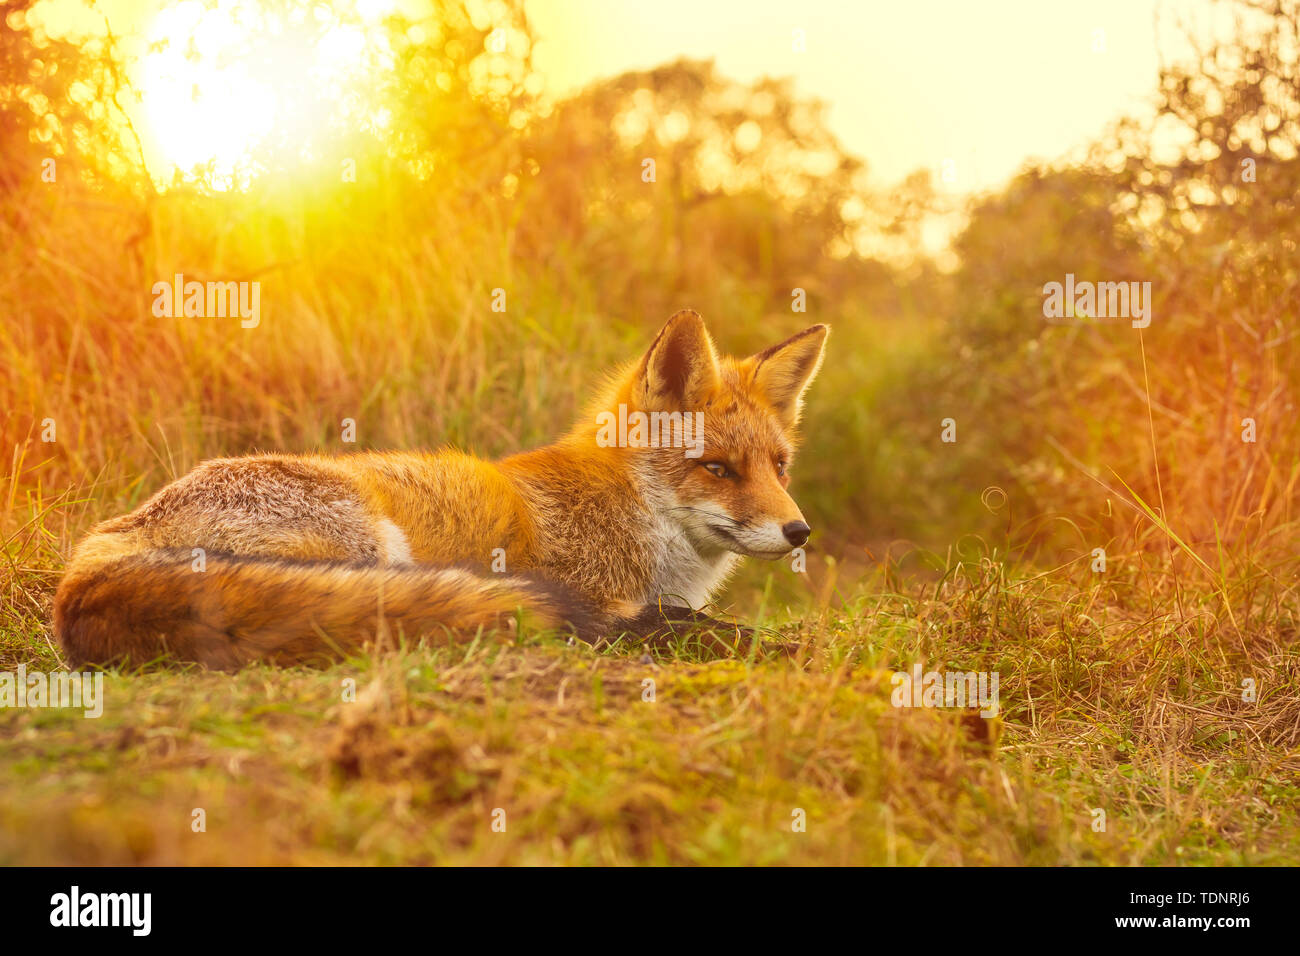 Wild young red fox (vulpes vulpes) vixen scavenging in a forest and dunes during sunset Stock Photo